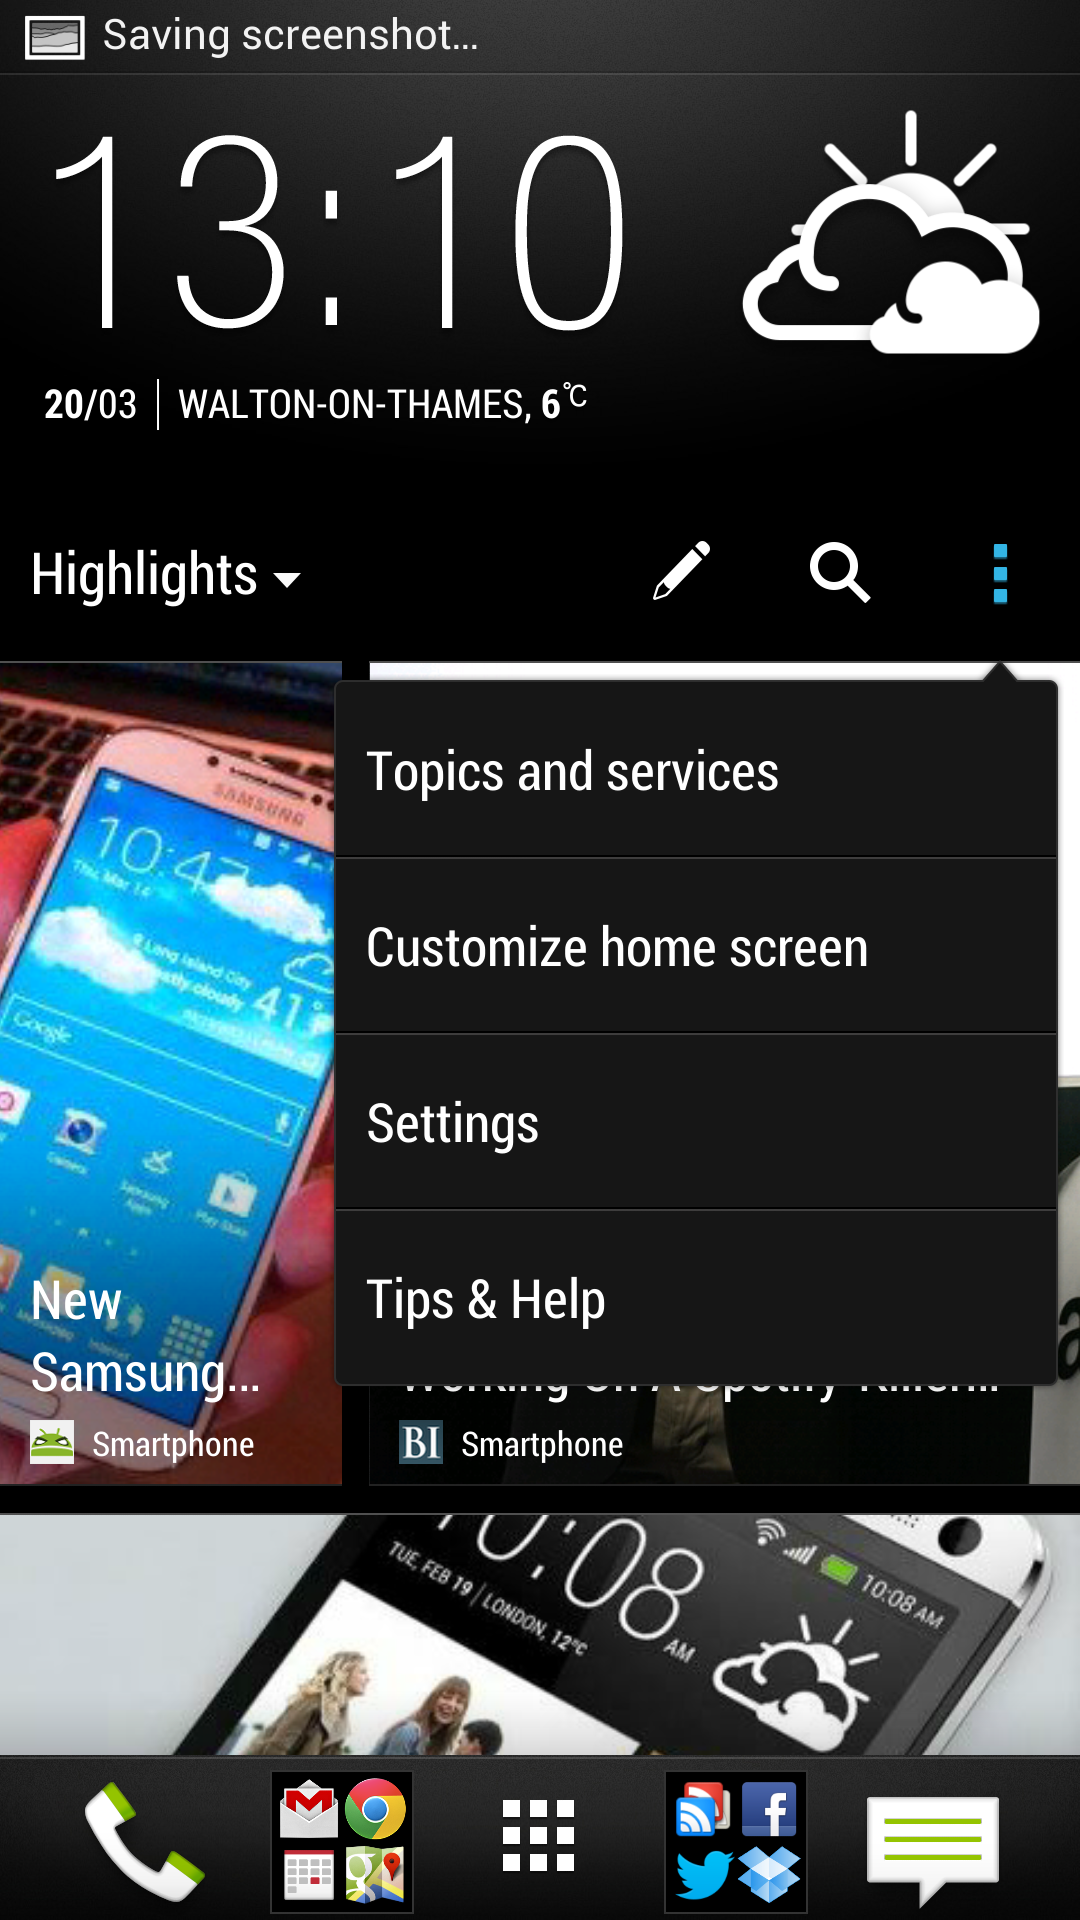 HTC One X Blink Feed